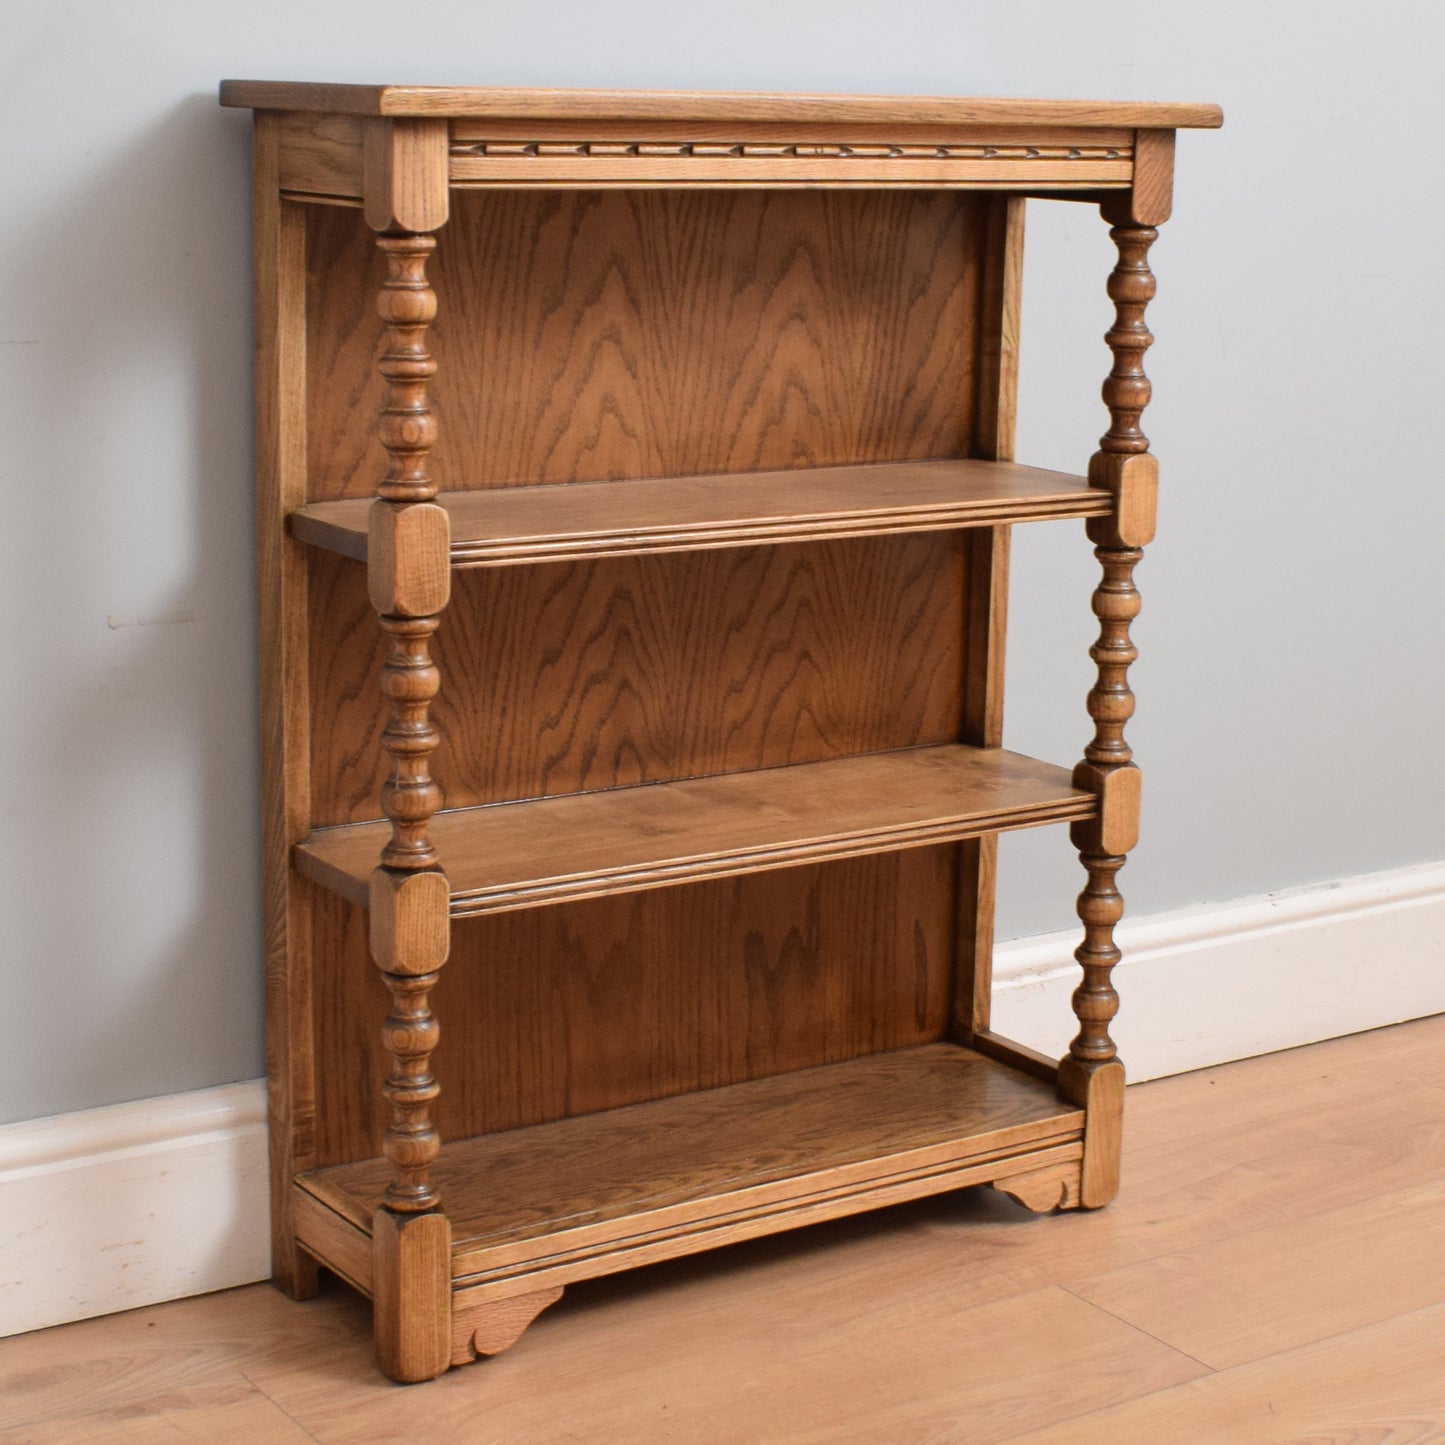 Restored 'Old Charm' Bookcase